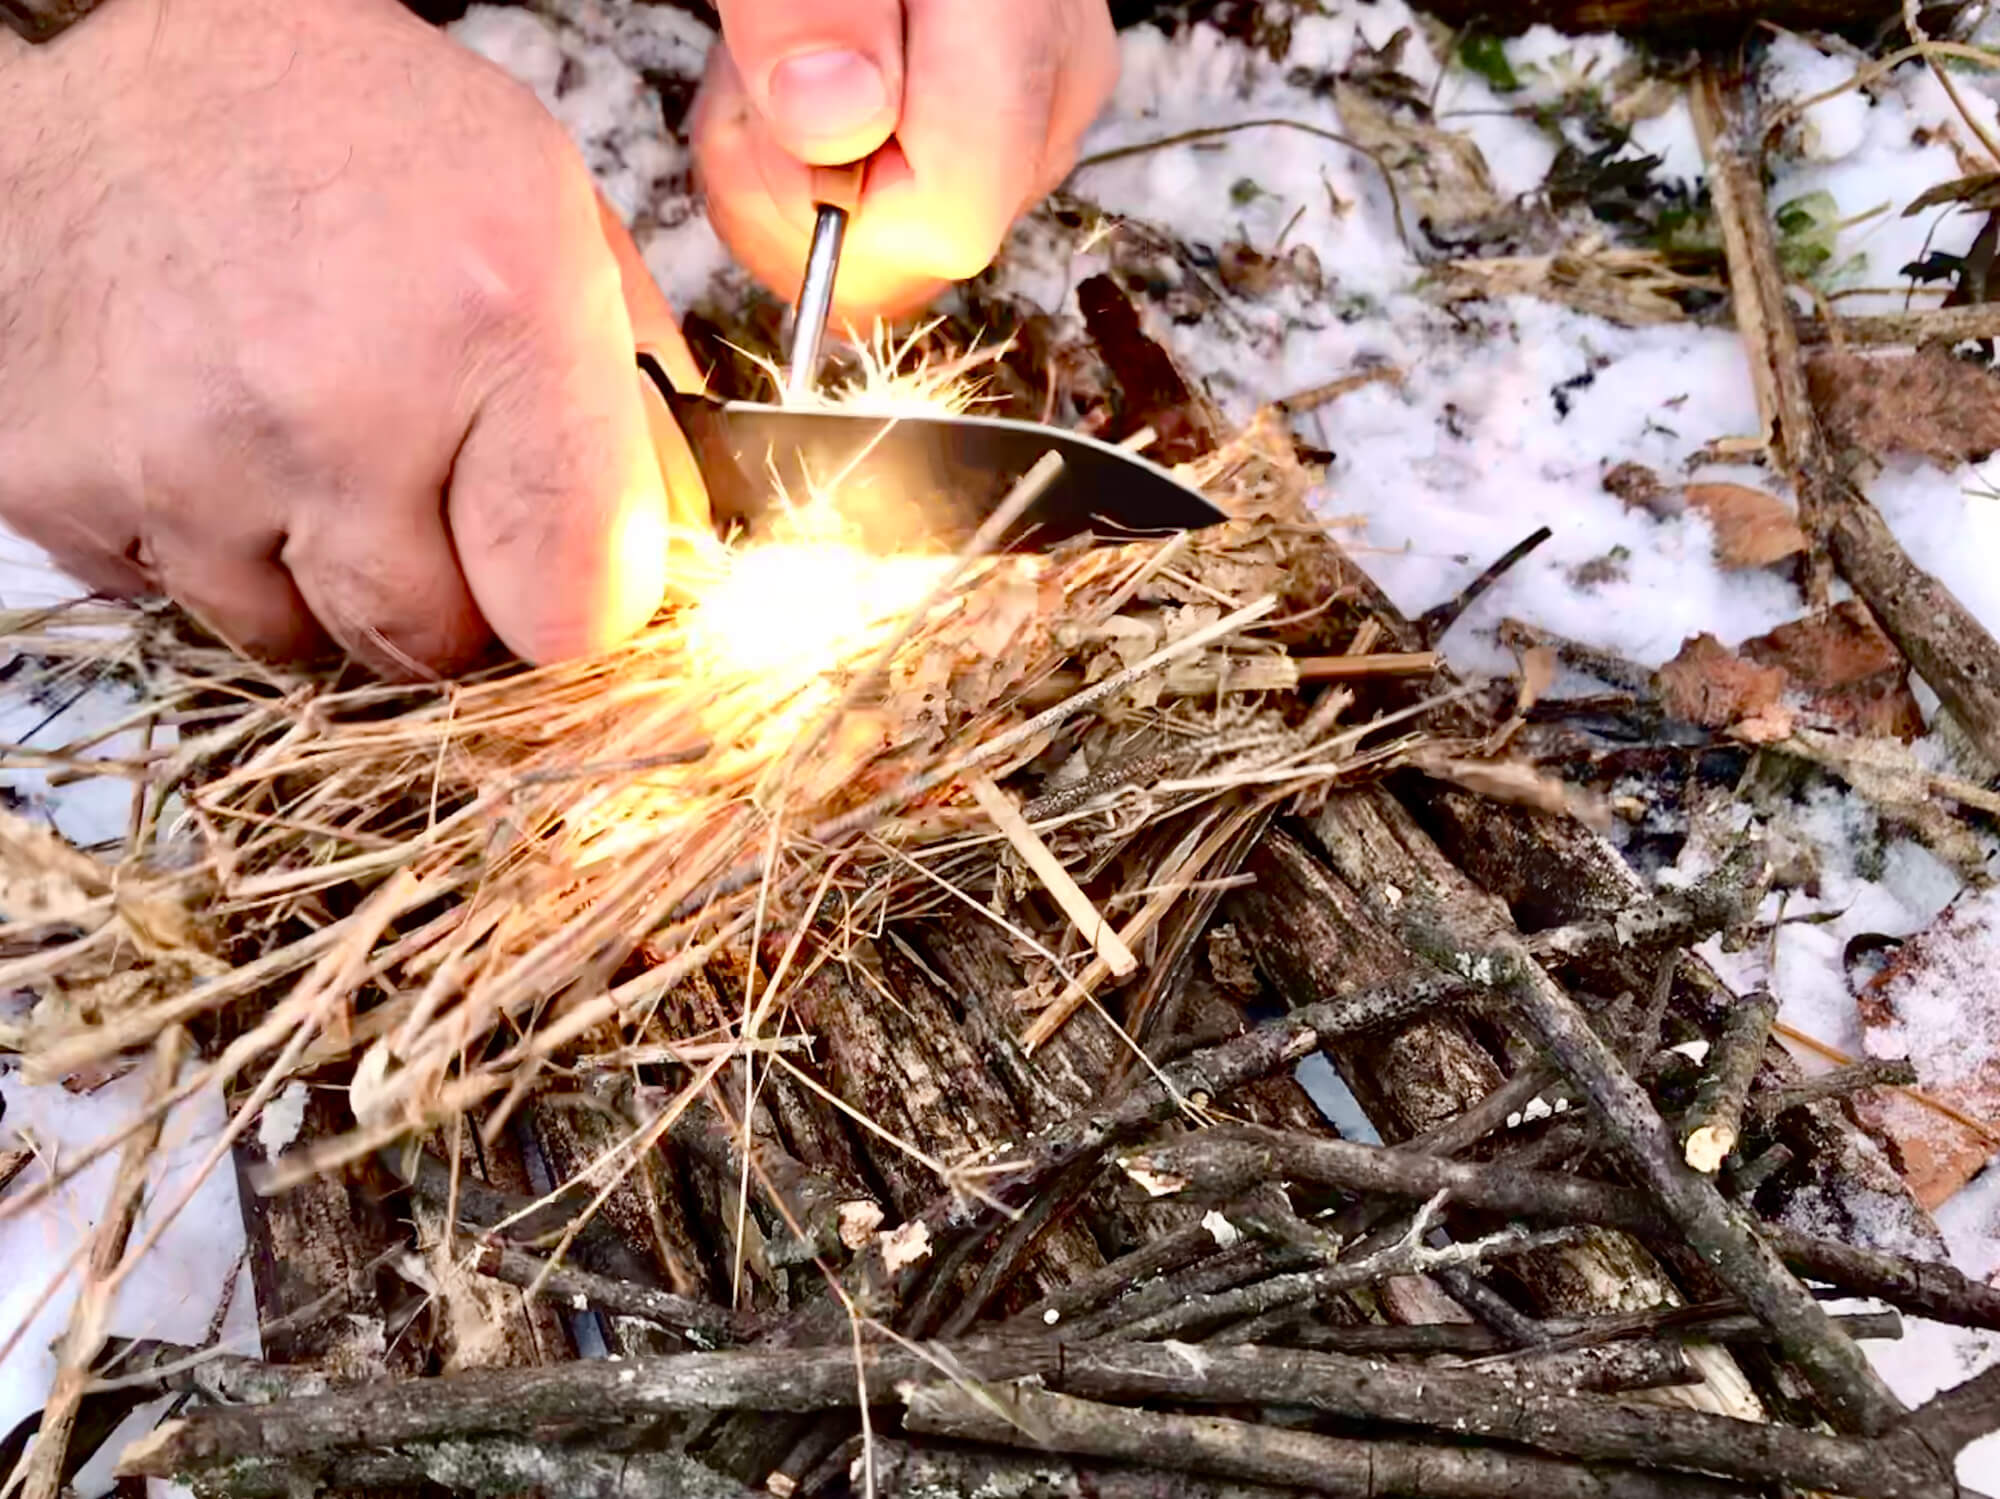 Kindling being used to start a Fire